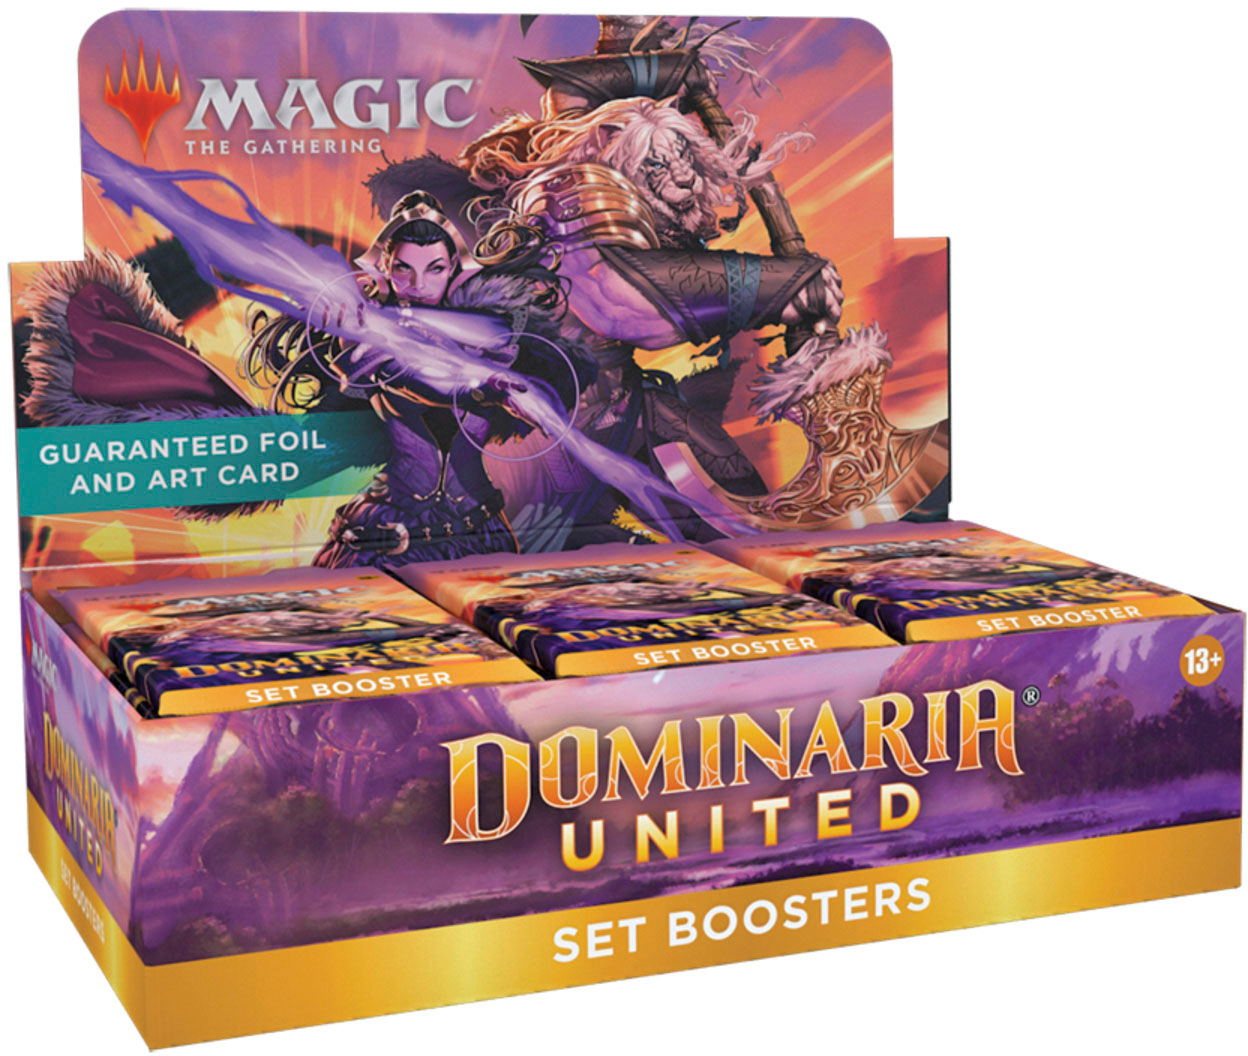 Dominaria United Set Boosters